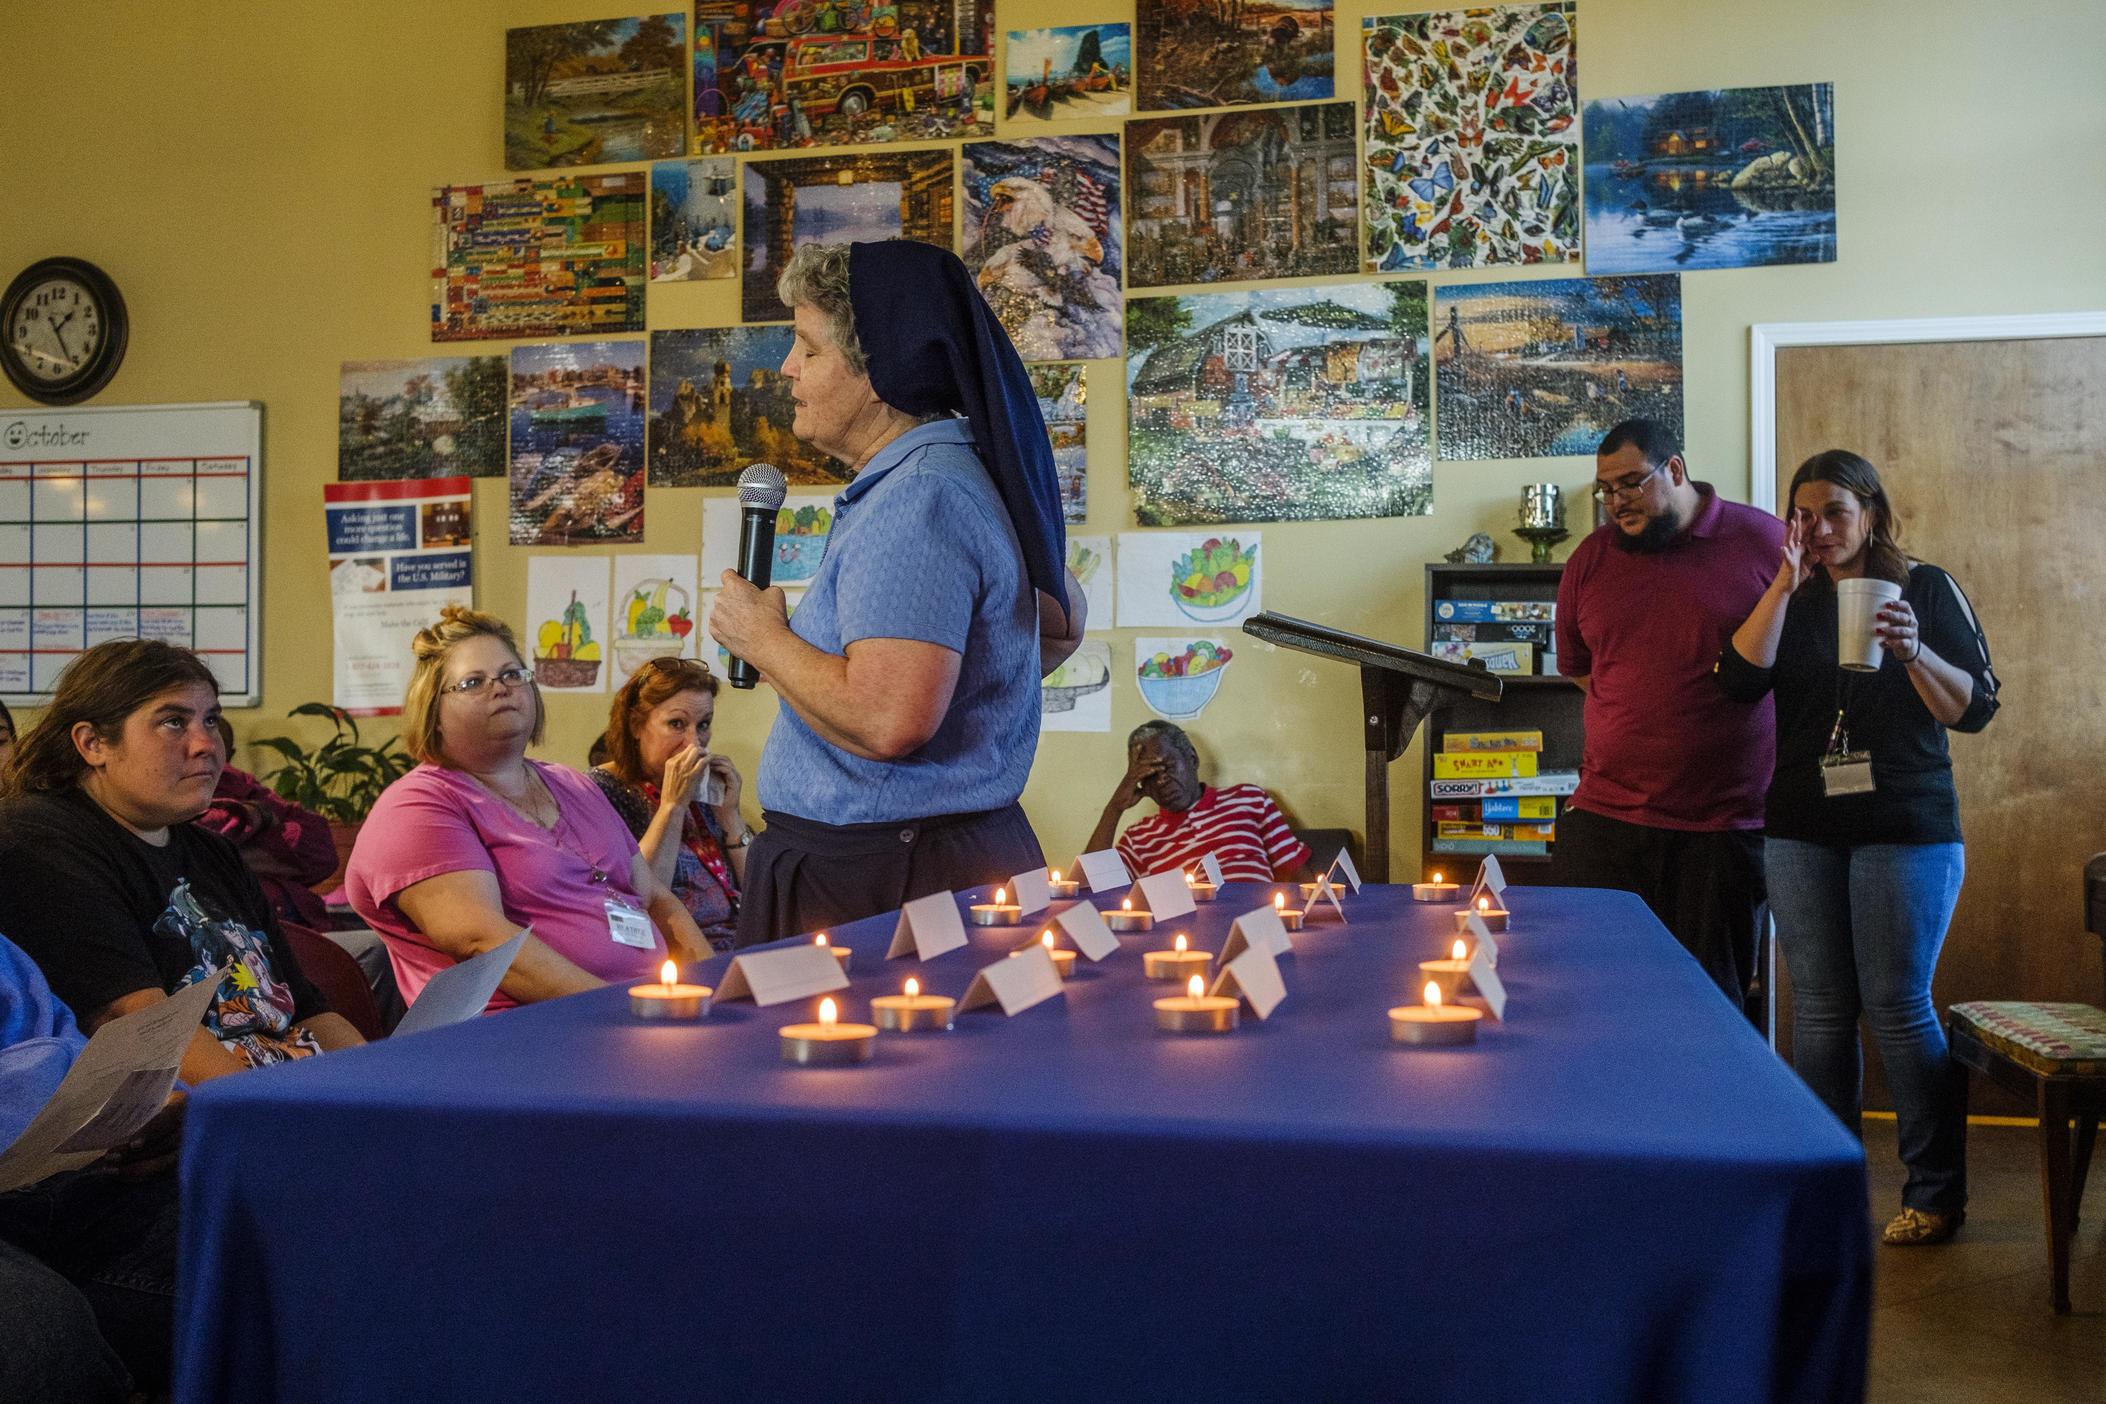 Sister Theresa Sullivan leads a memorial service for members of the unhoused community in Macon, Ga, each represented by a votive candle, during an annual memorial service at the Daybreak Resource Center this week. 